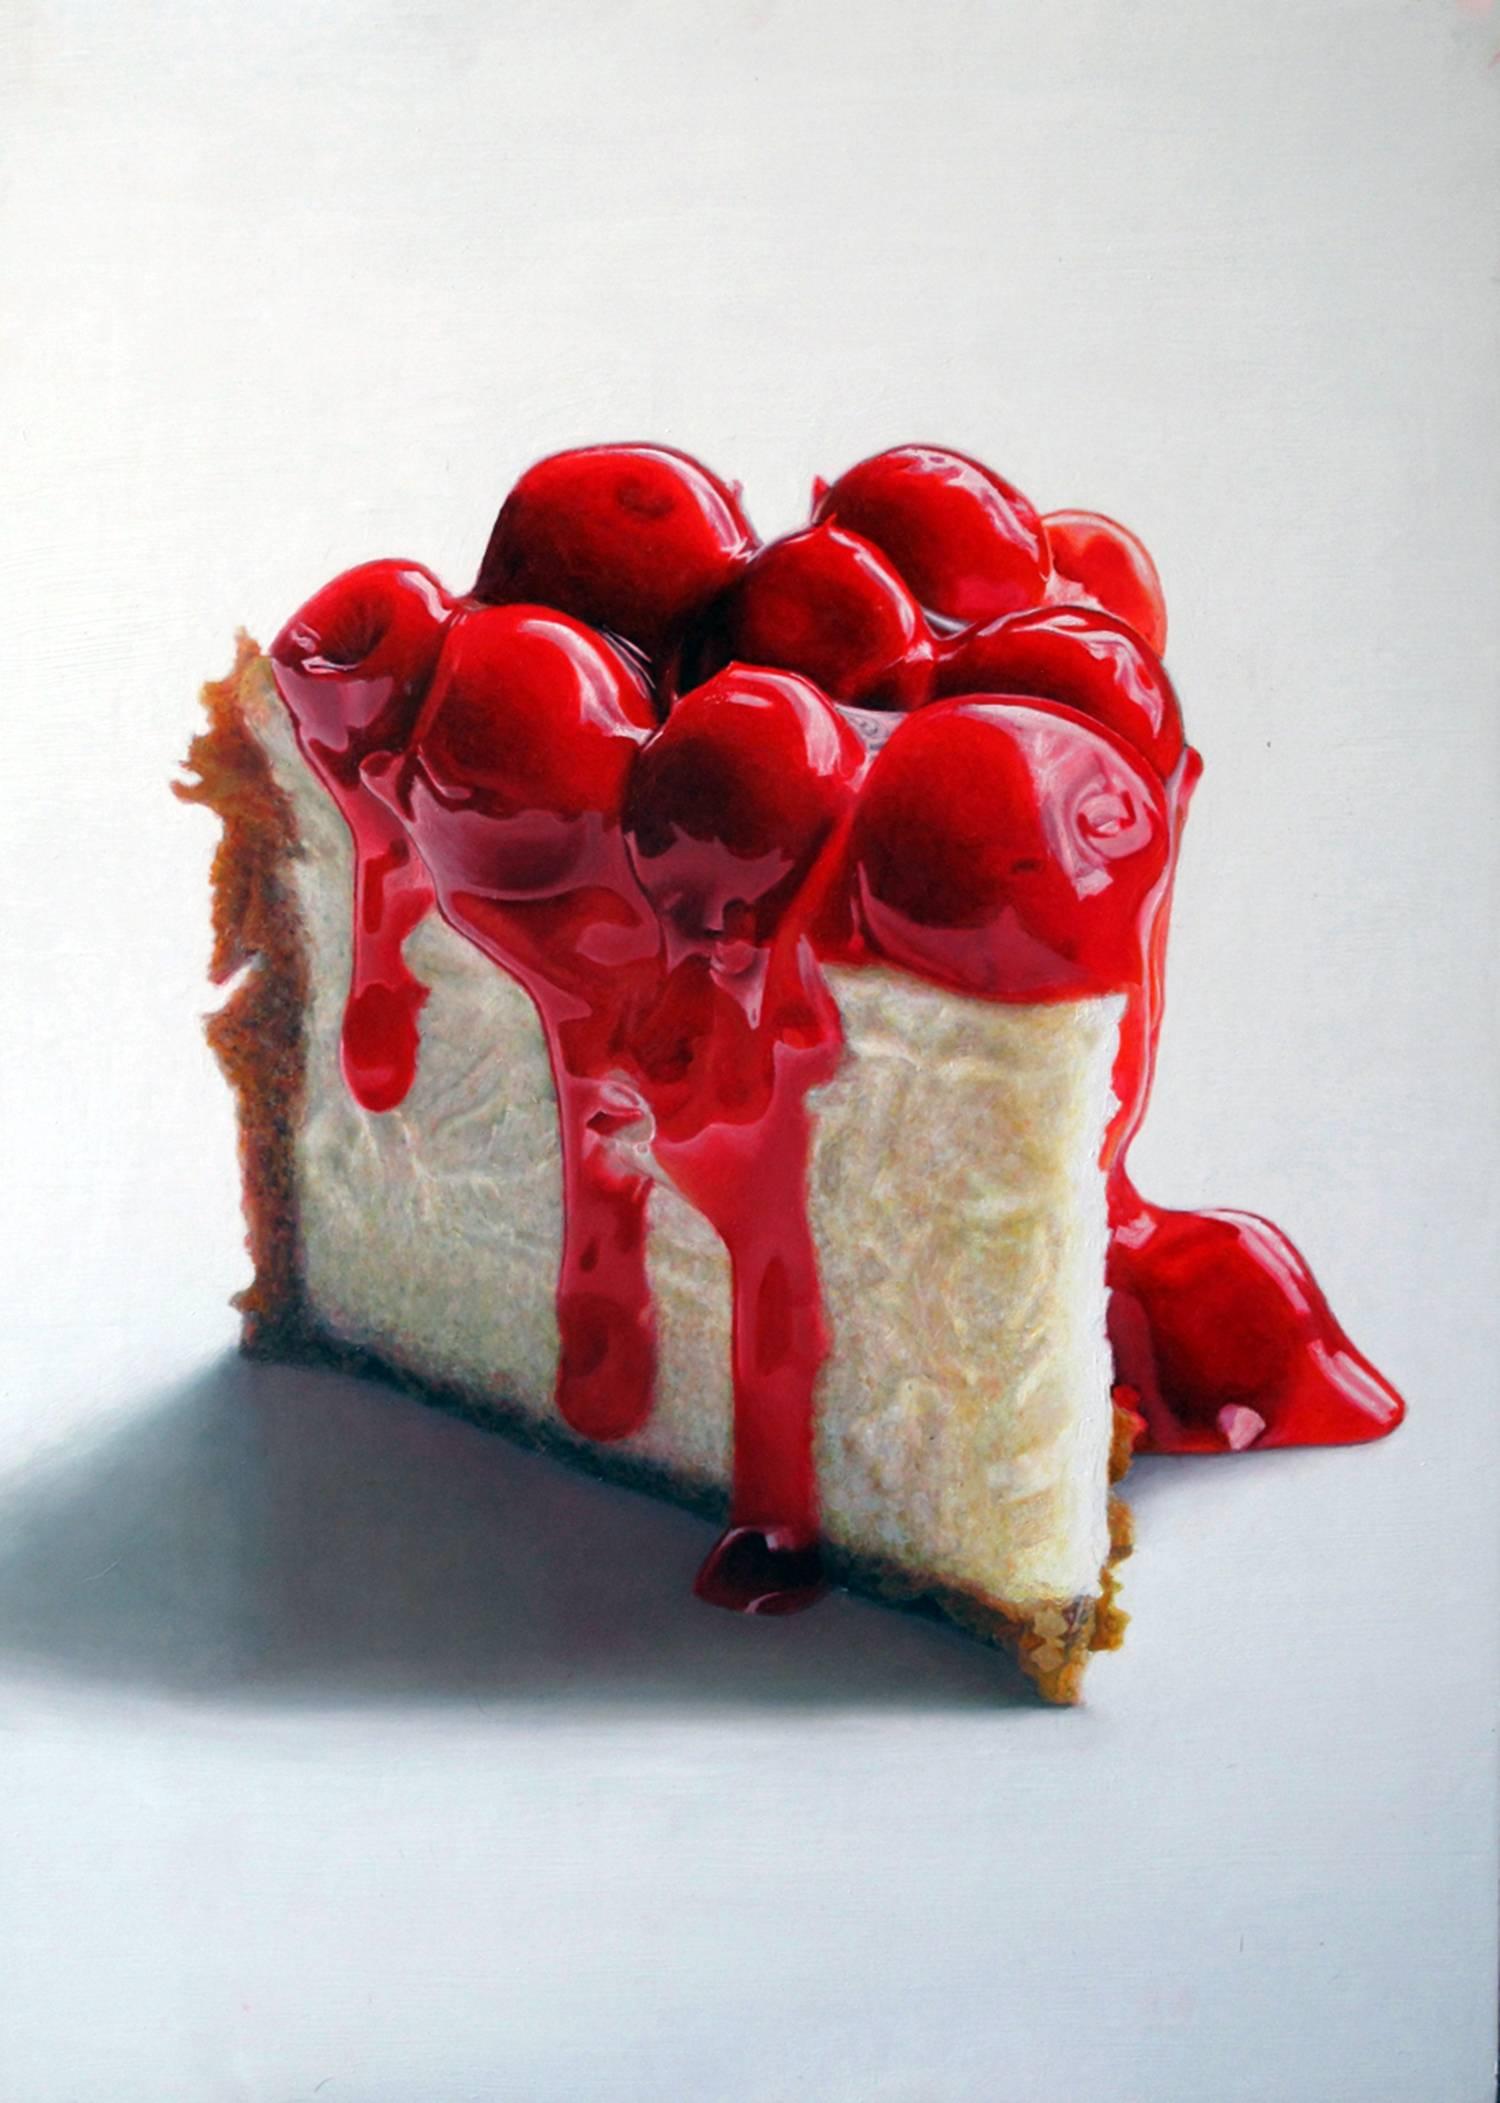 "Cherry Cheesecake"  Photo-Realist Still Life, Cheesecake Slice in Red and White